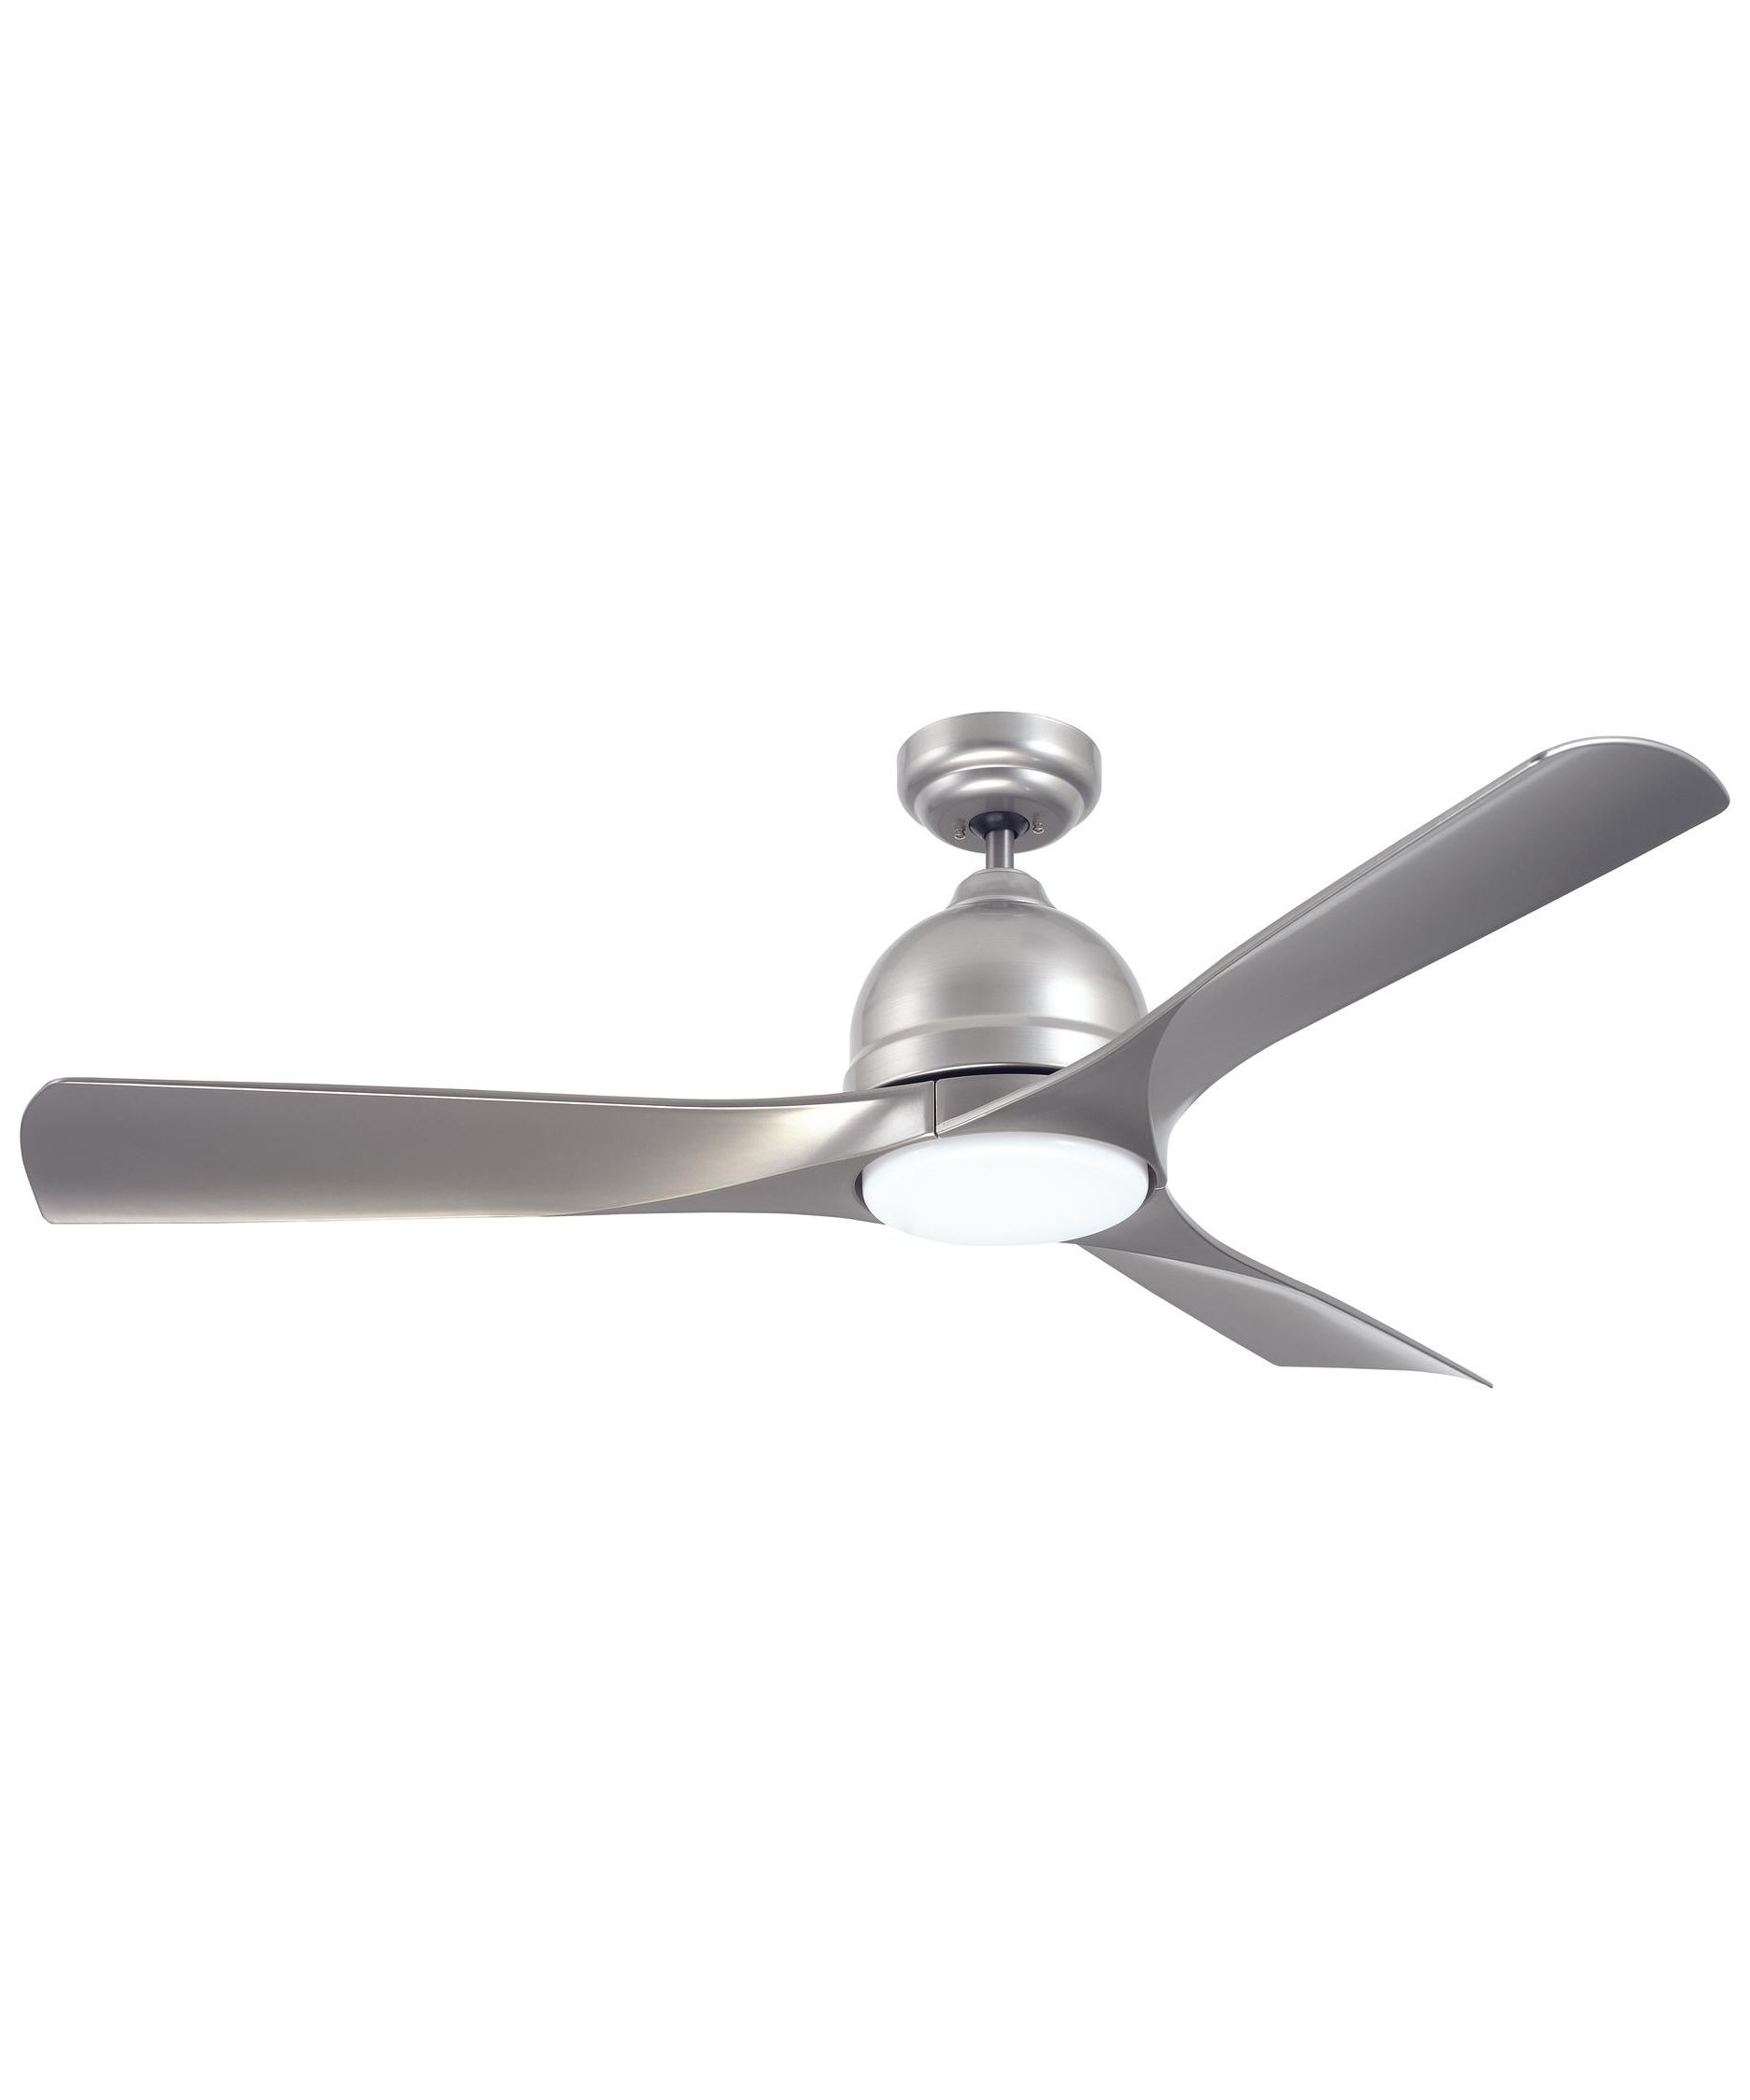 Grey Outdoor Ceiling Fans Throughout 2018 Emerson Cf590 Volta 54 Inch 3 Blade Ceiling Fan (View 20 of 20)